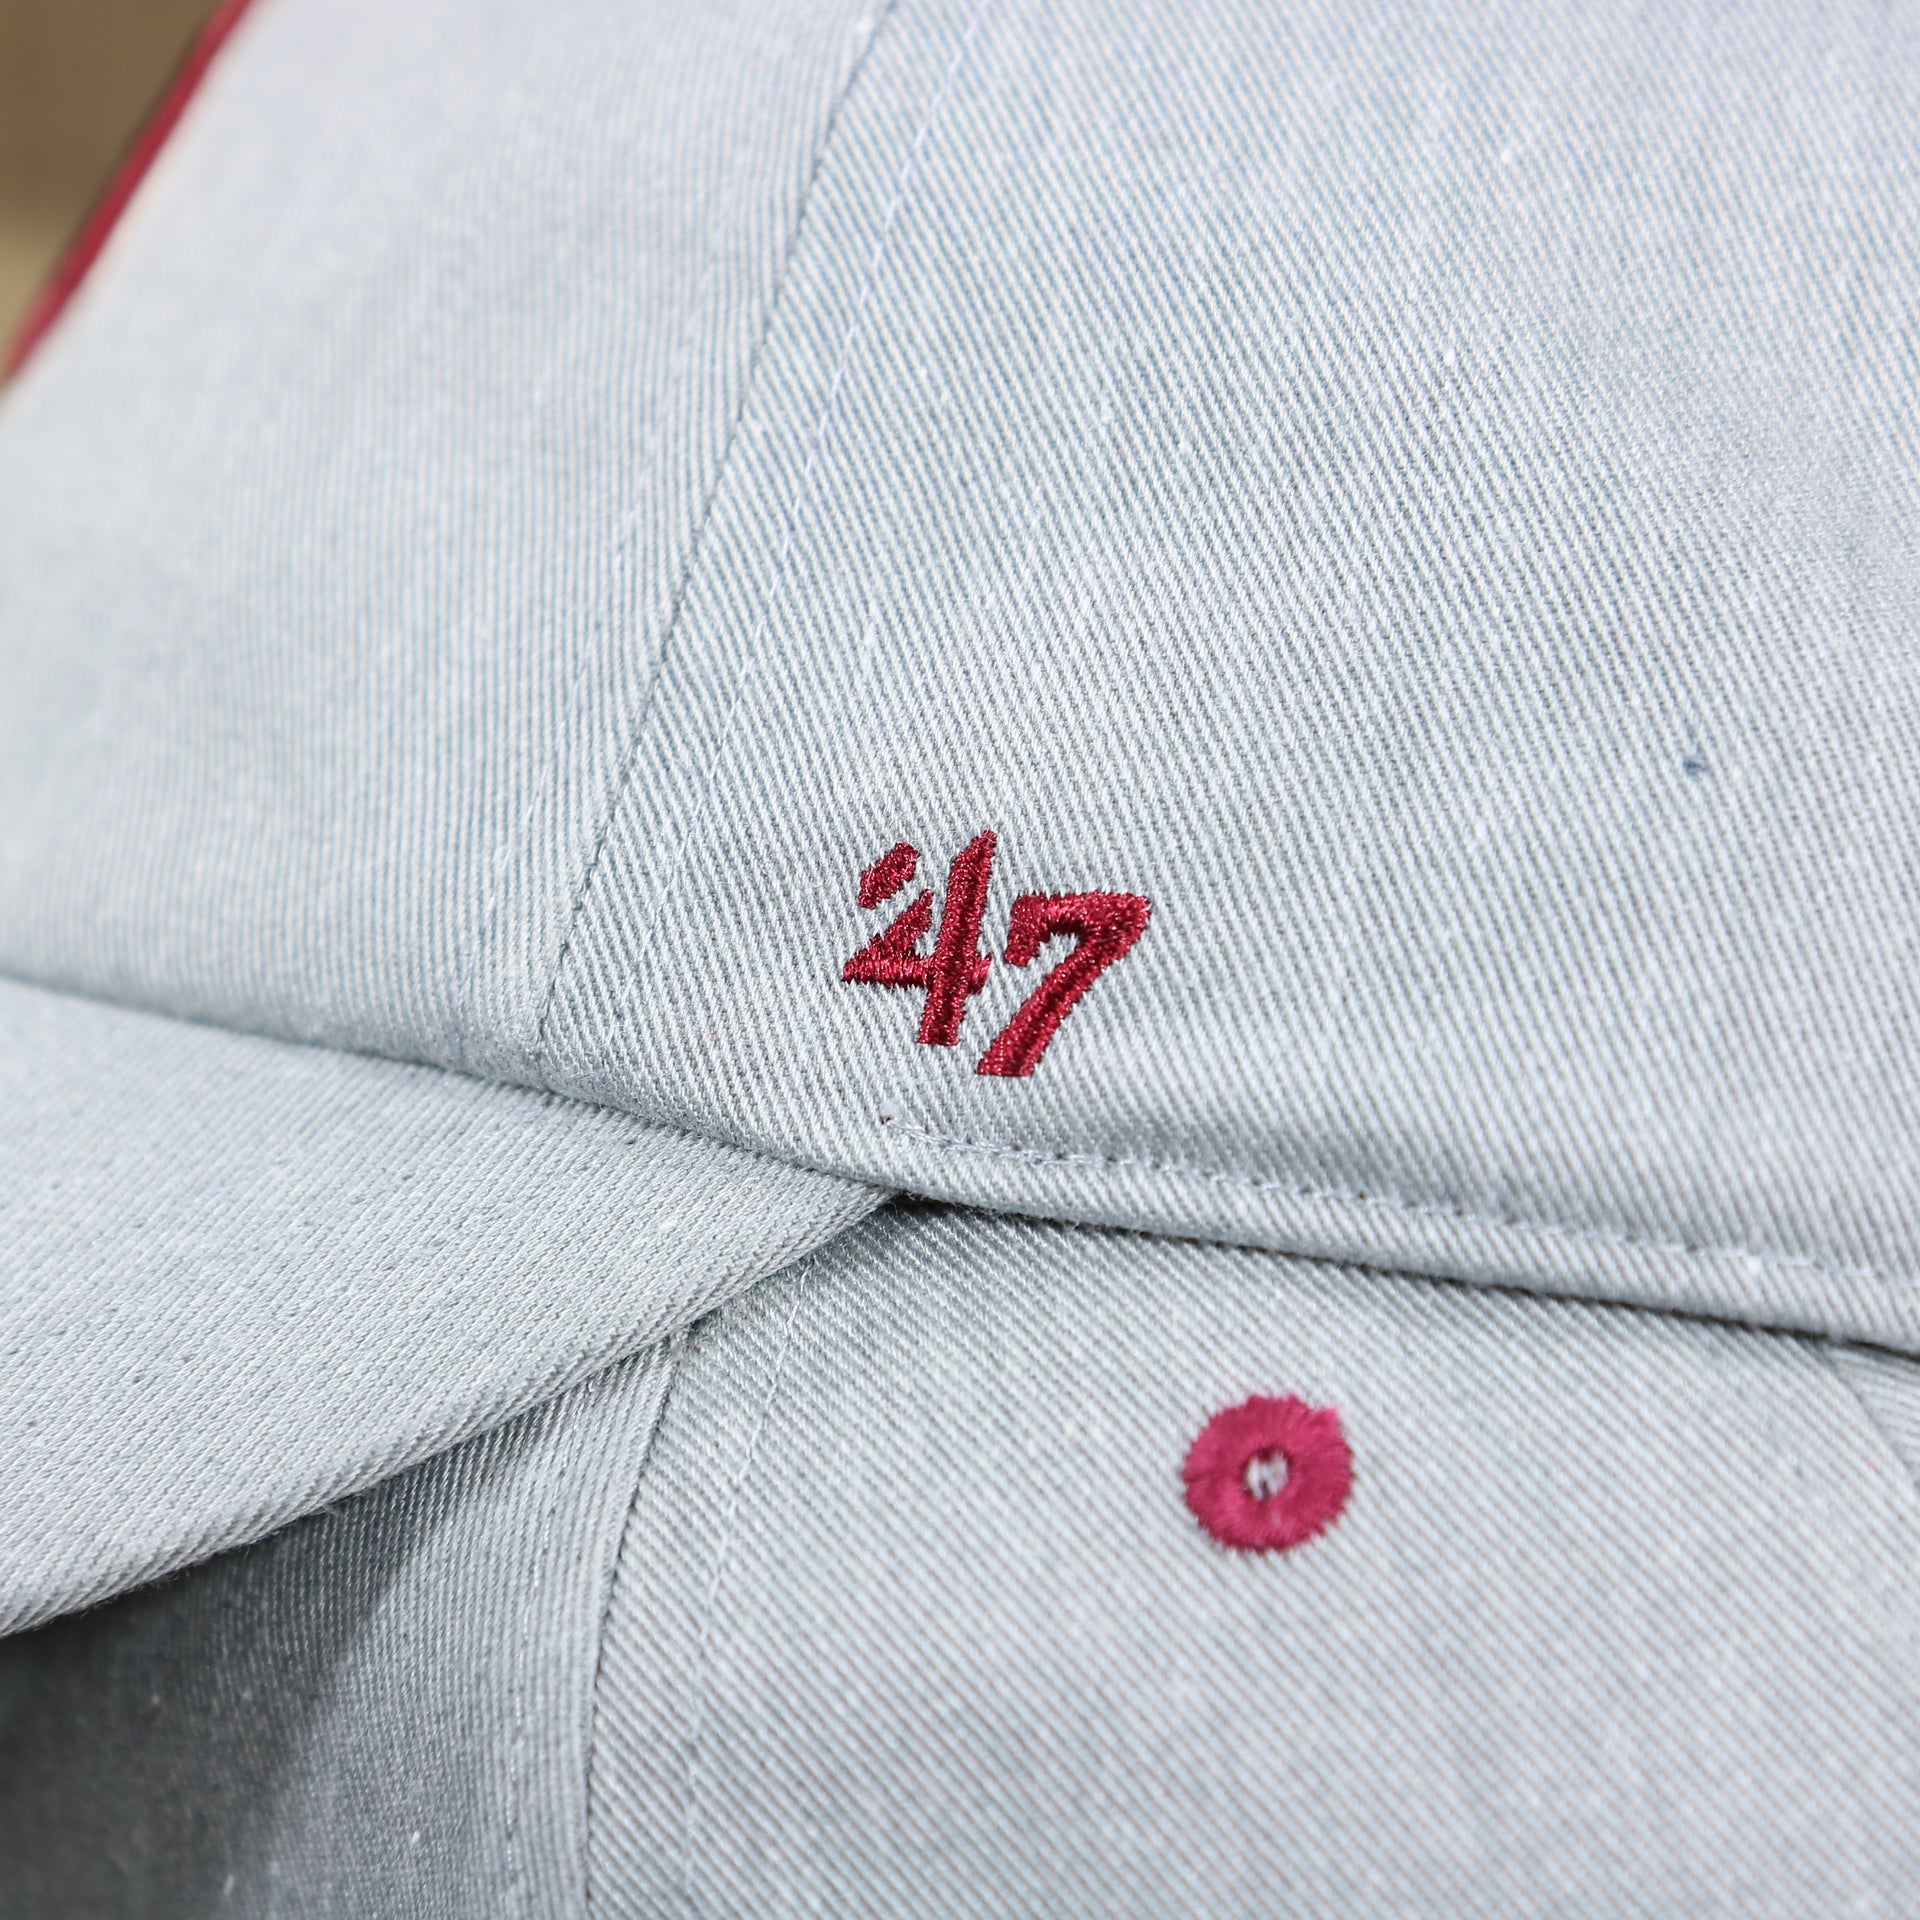 The 47 Brand Logo on the Cooperstown Phillies Logo Green Bottom Philadelphia Phillies Dad Hat | Gray Dad Hat